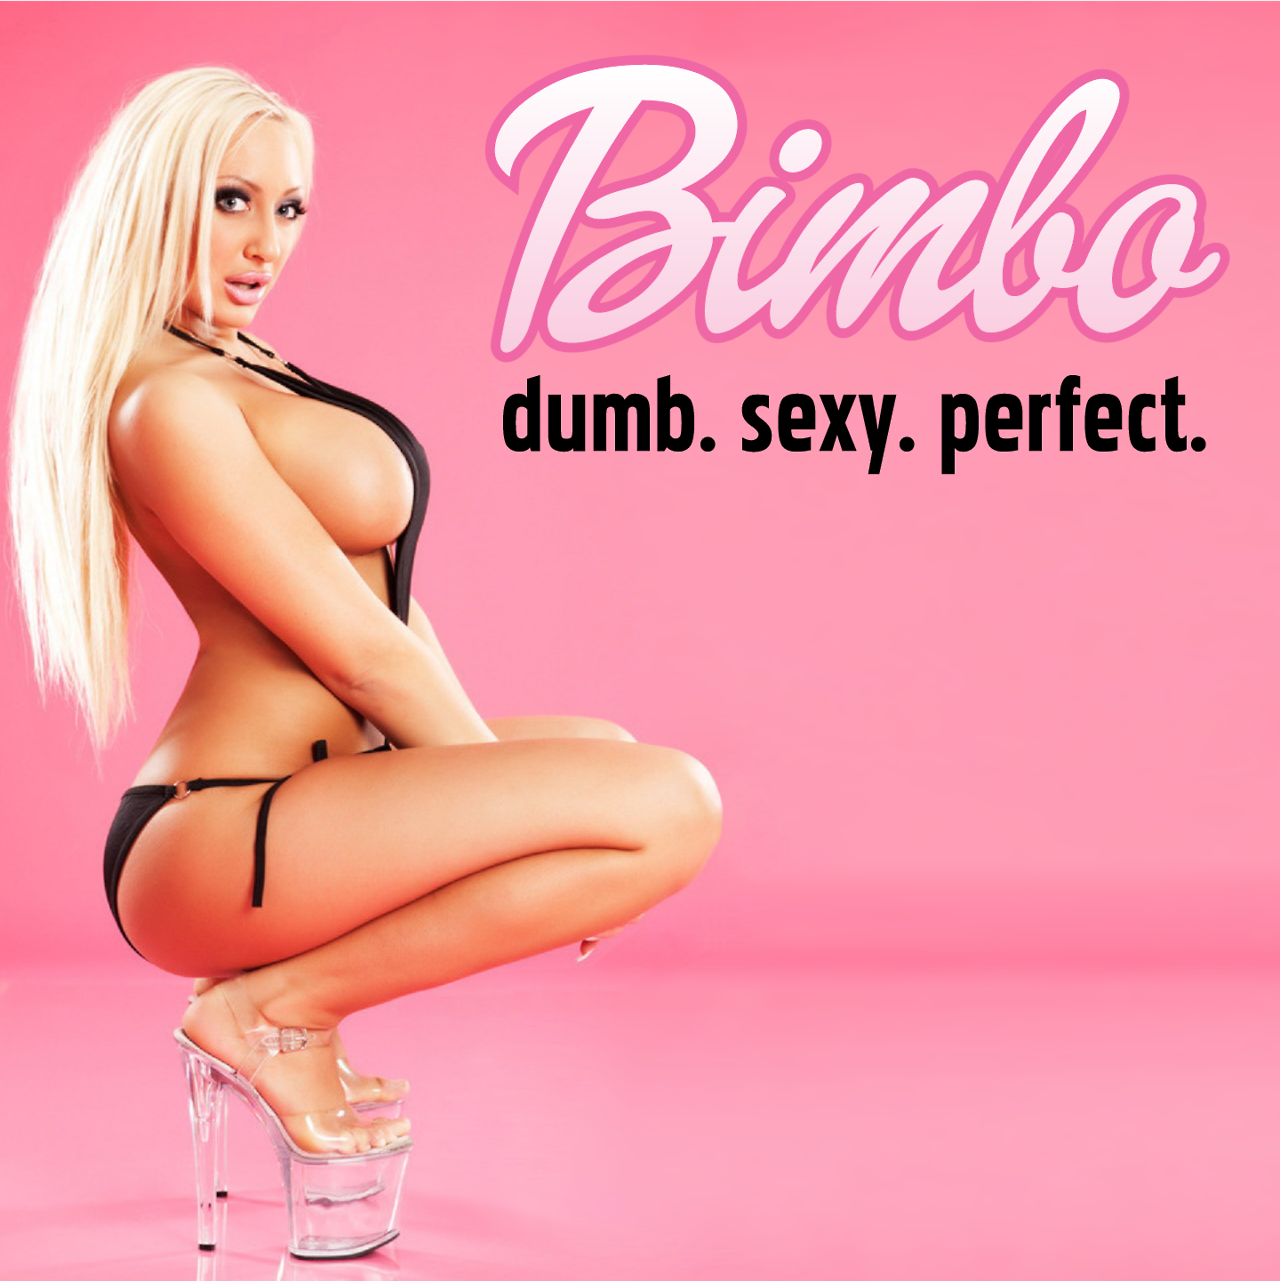 Watch the Photo by waynetriskelion with the username @waynetriskelion, posted on August 4, 2019. The post is about the topic Bimbo. and the text says 'More bimbo shots from Tumblr. #Bimbo #TumblrRefugees'